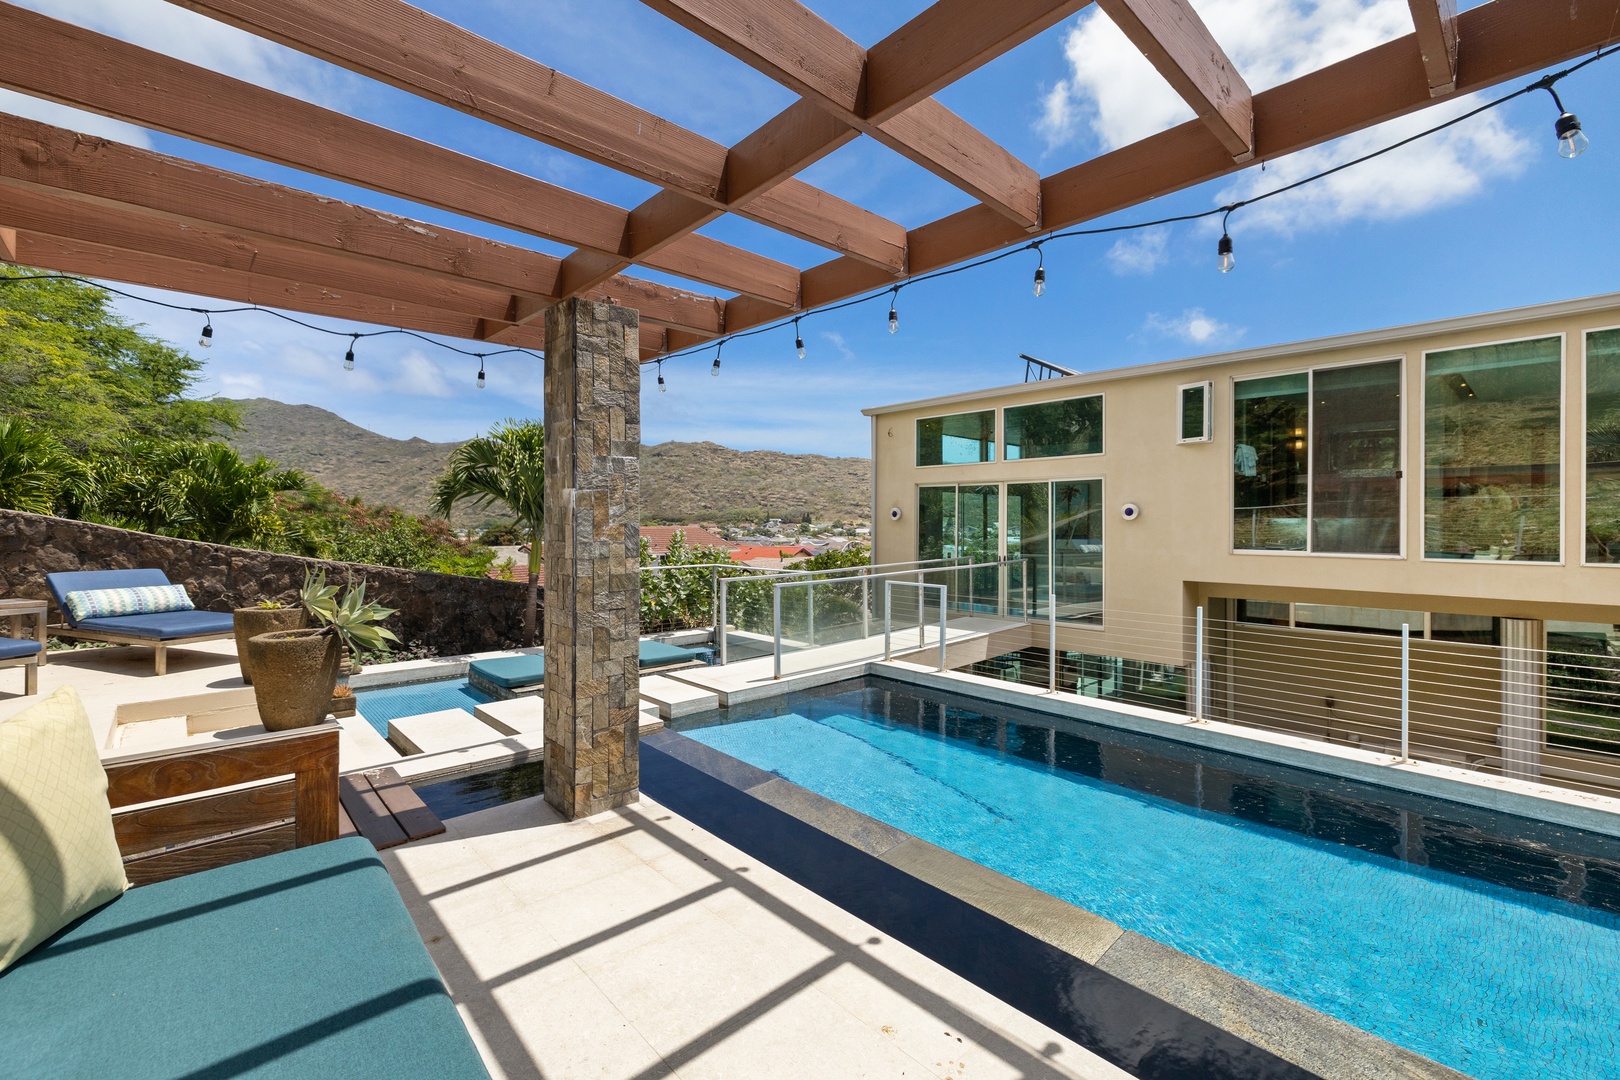 Honolulu Vacation Rentals, Villa Luana - Private hotel-style pool area, with lounge seating!